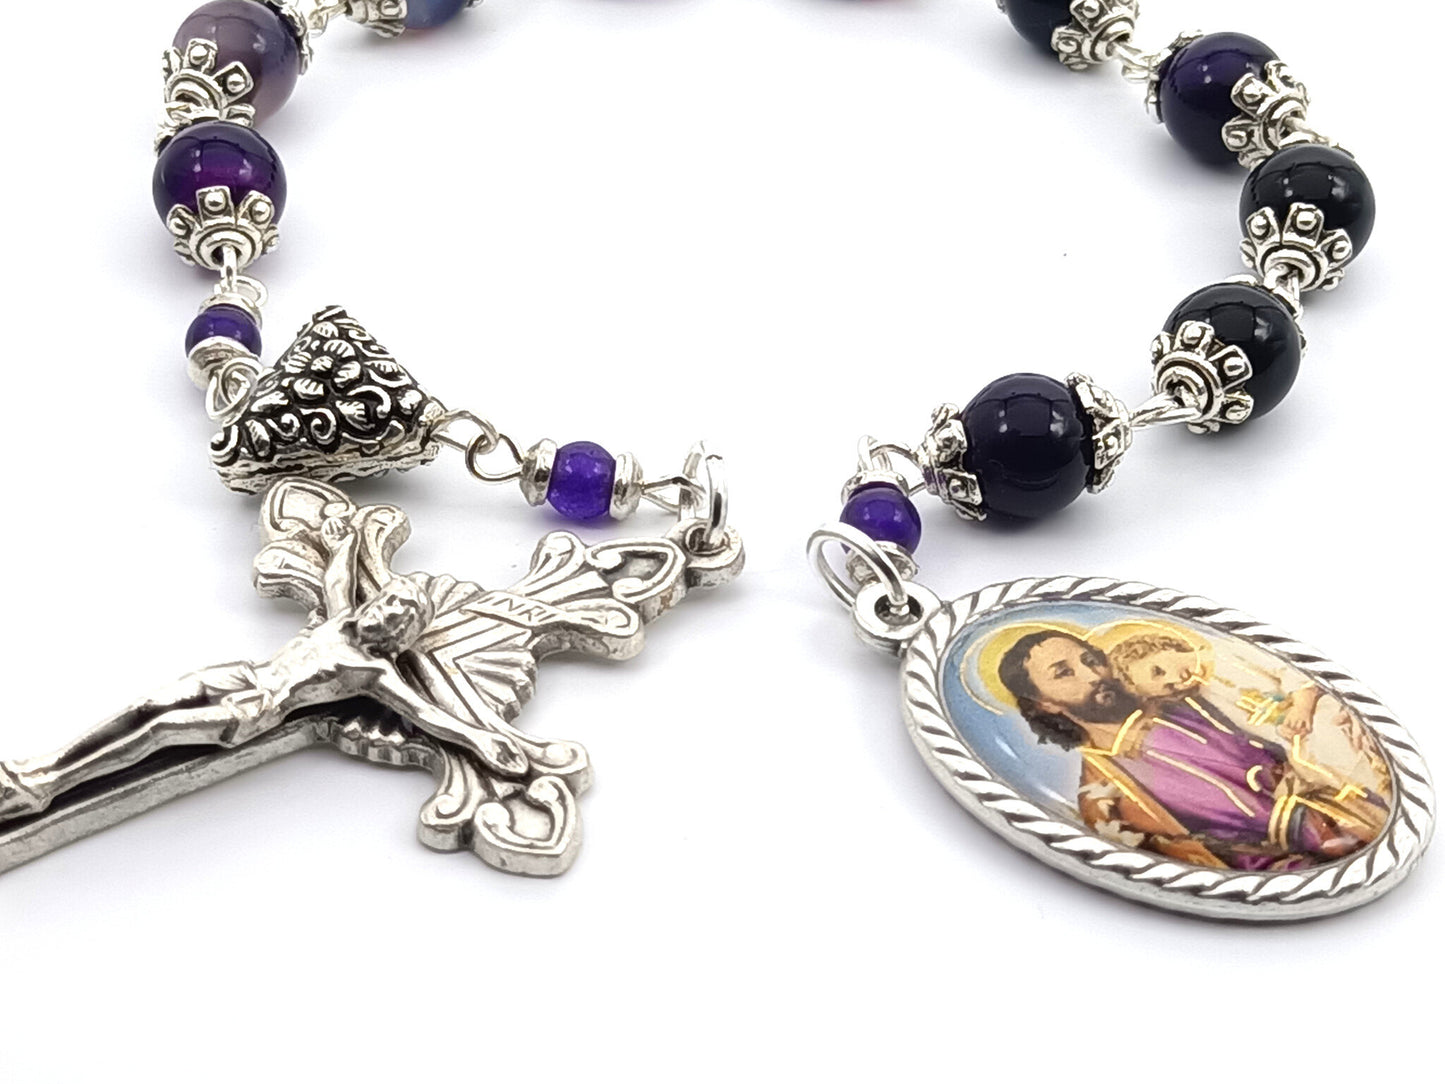 Saint Joseph unique rosary beads single decade with purple gemstone beads, silver crucifix, pater bead and St. Joseph picture centre medal.